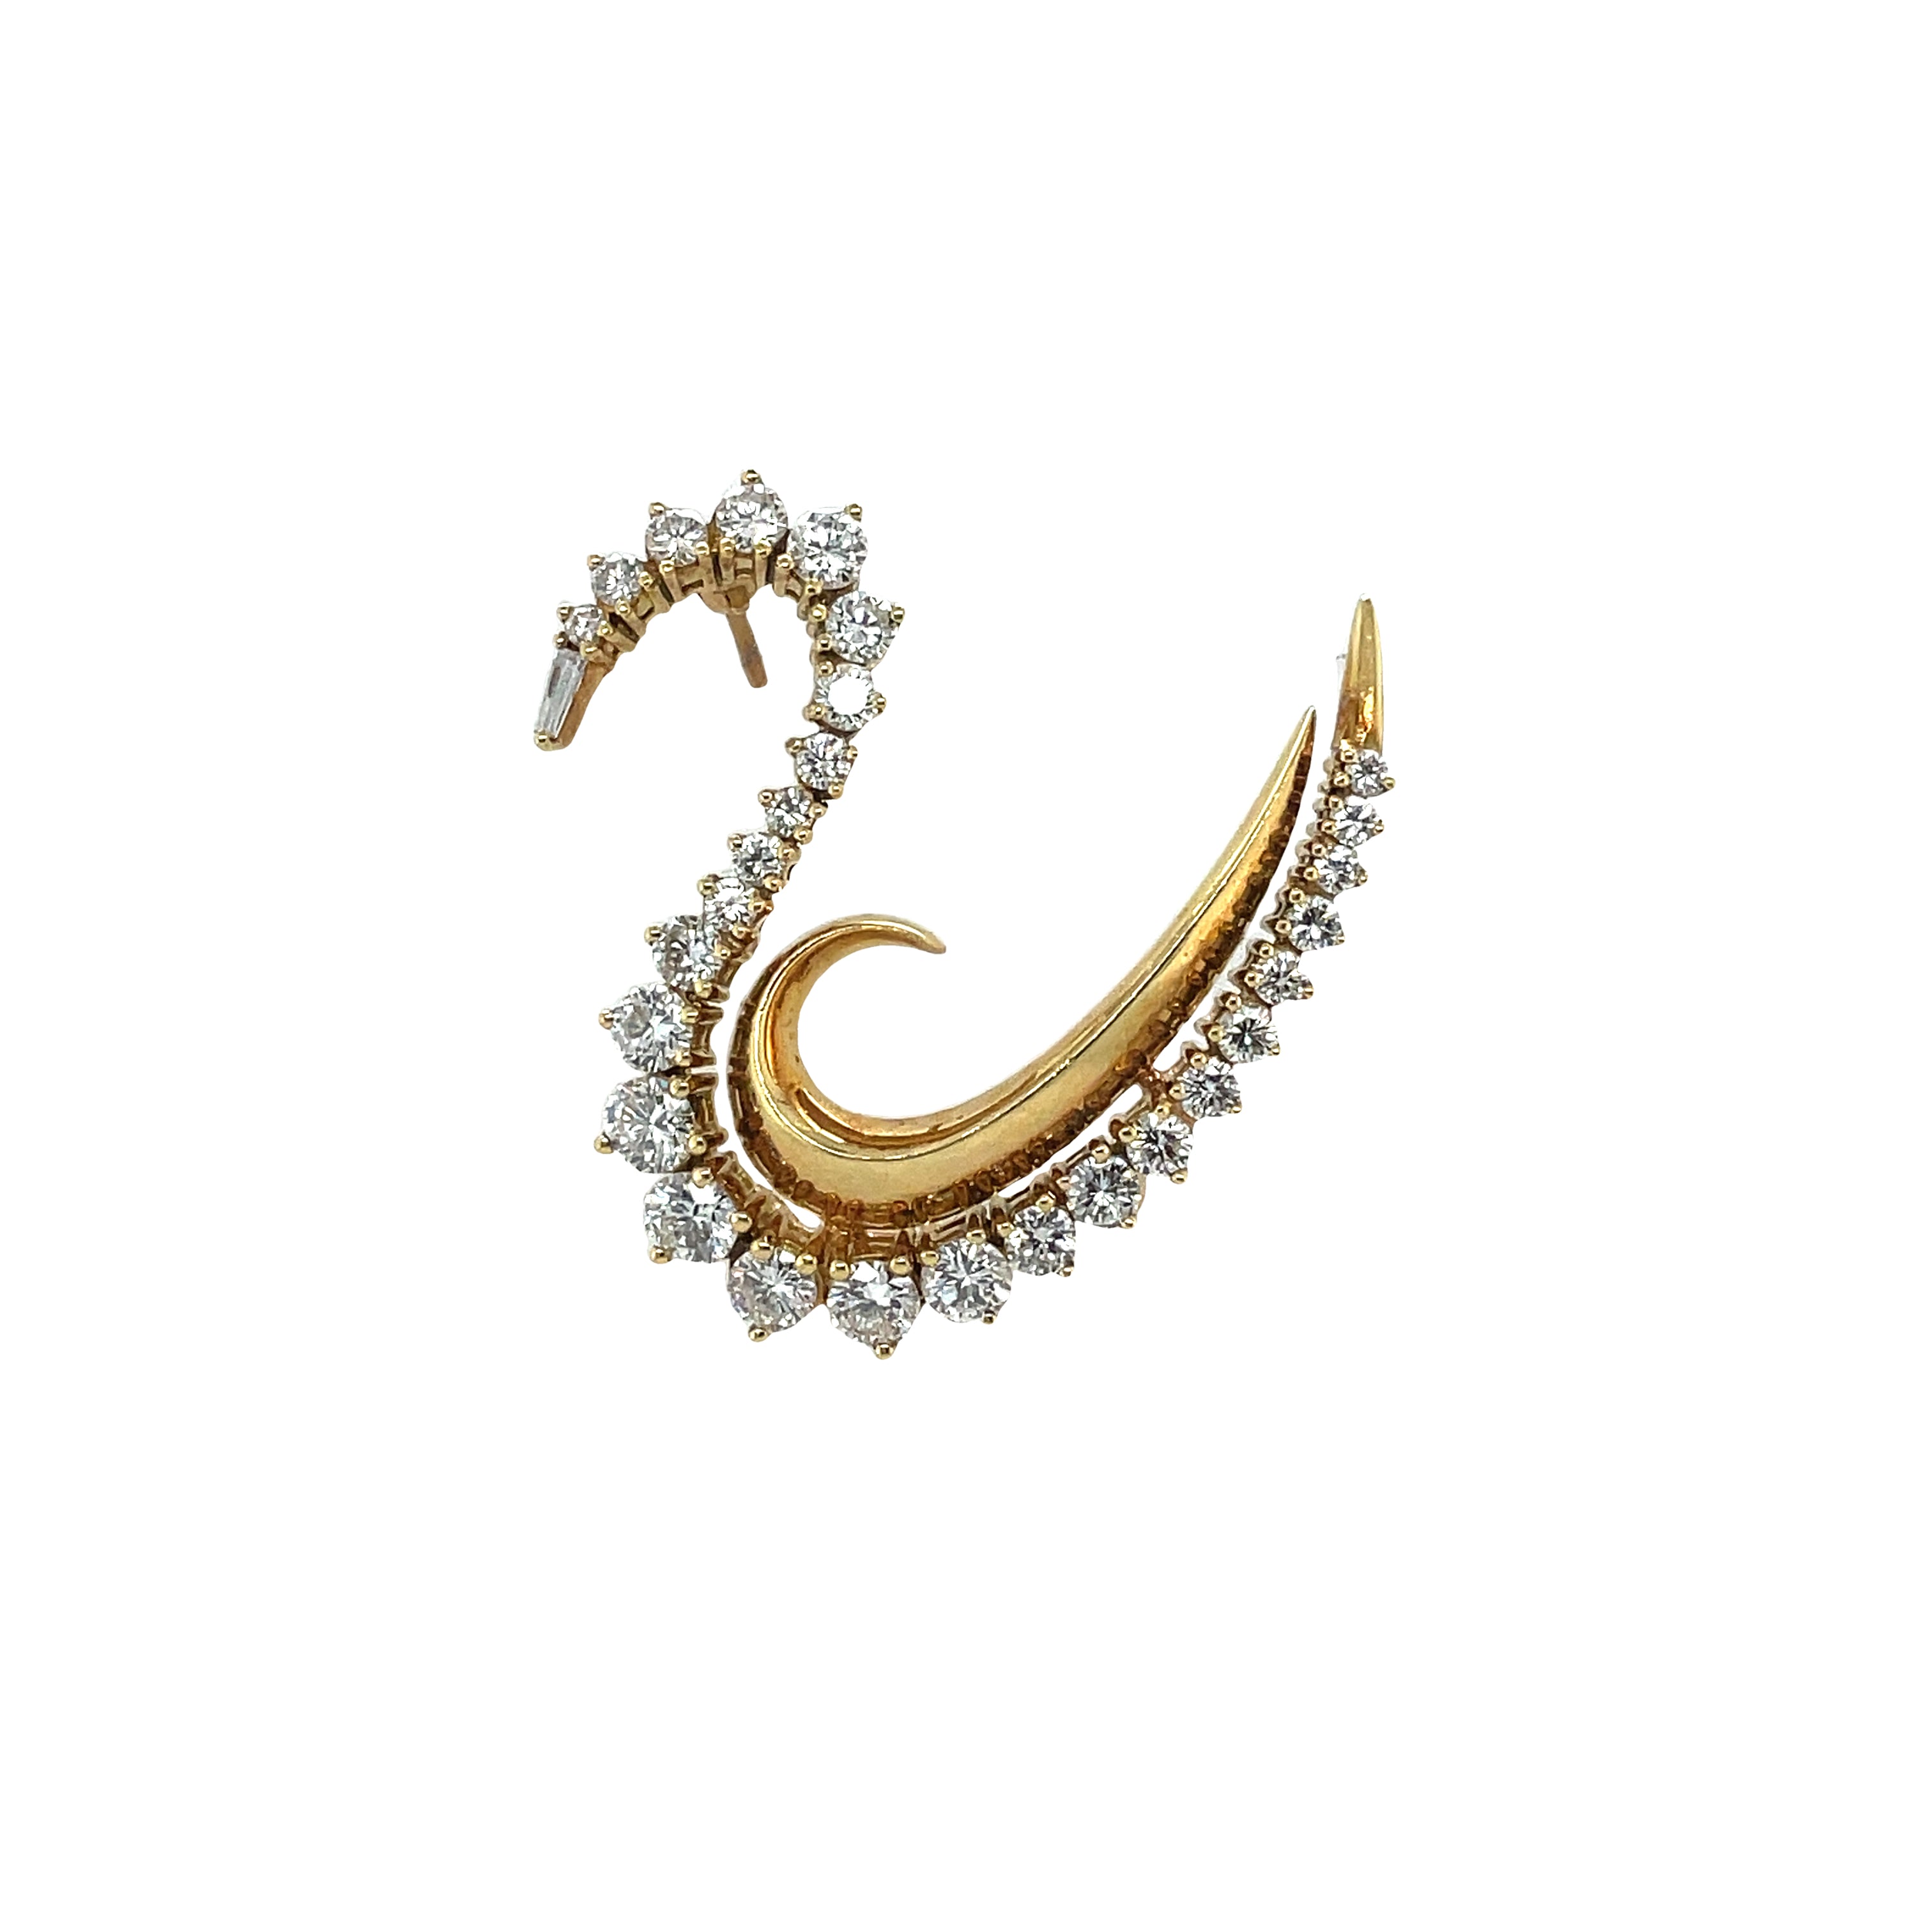 Vintage Delicate Gold Swan pin